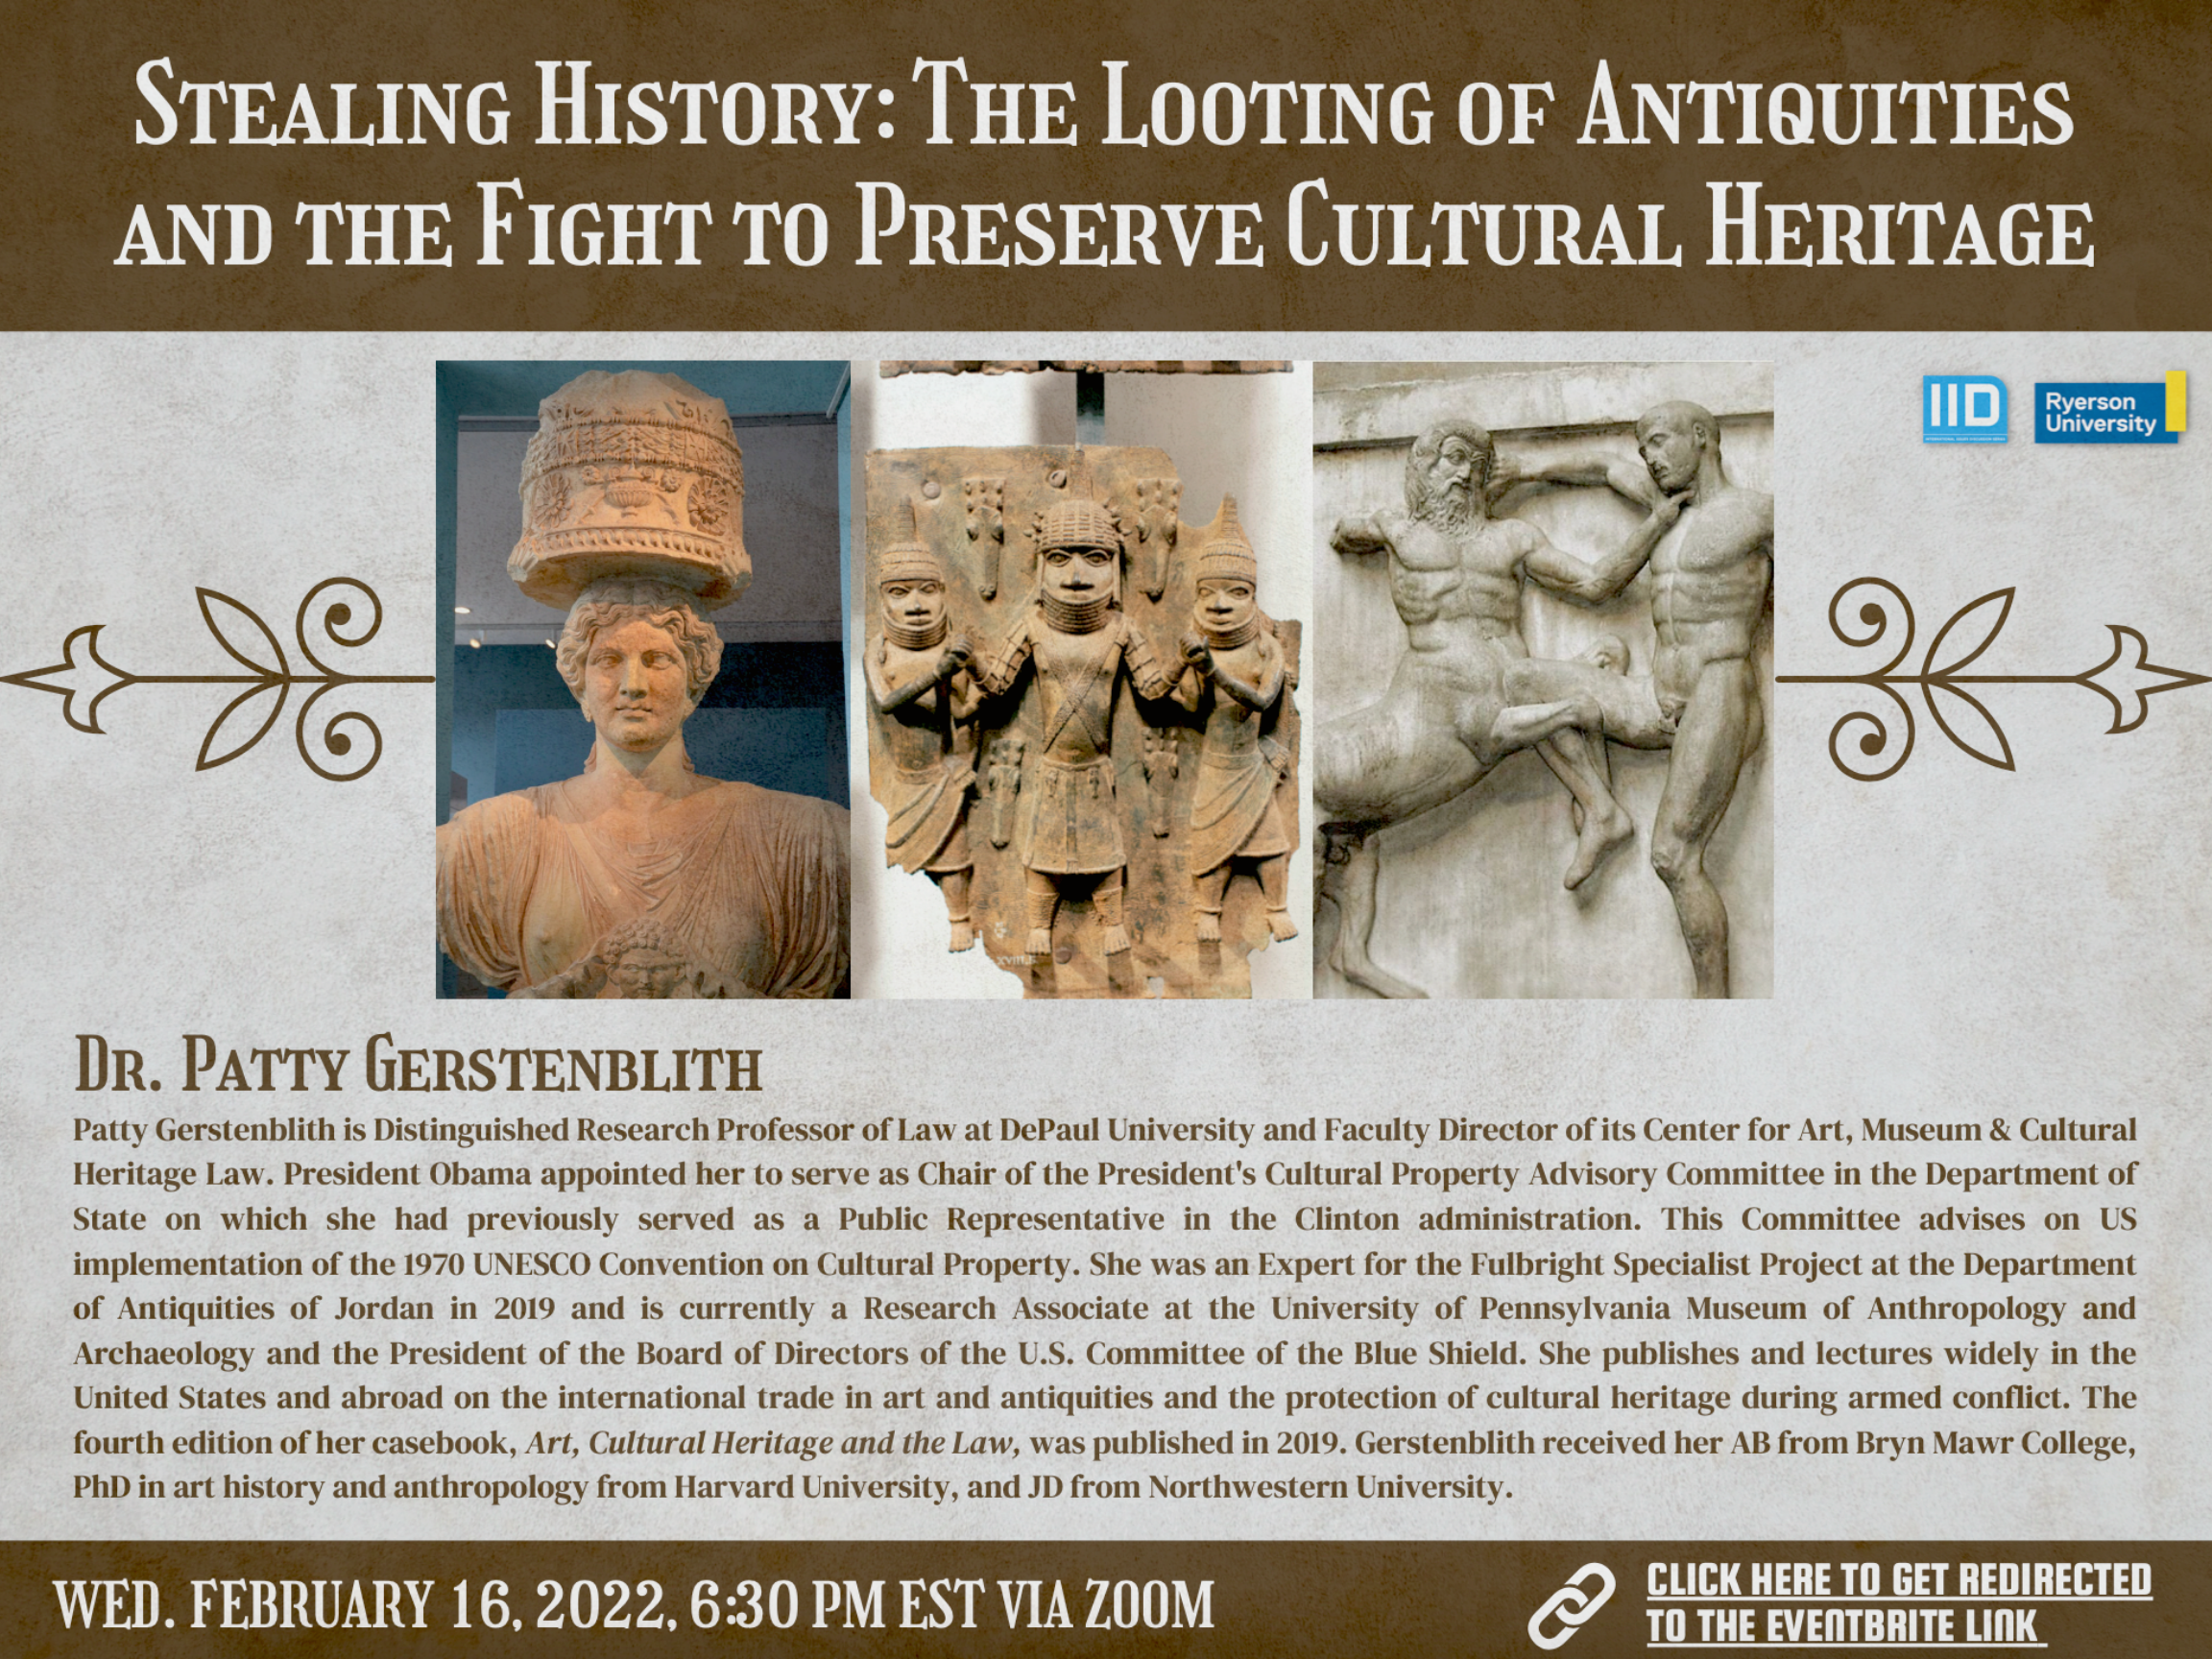 Stealing History: The Looting of Antiquities and the Fight to Preserve Cultural Heritage